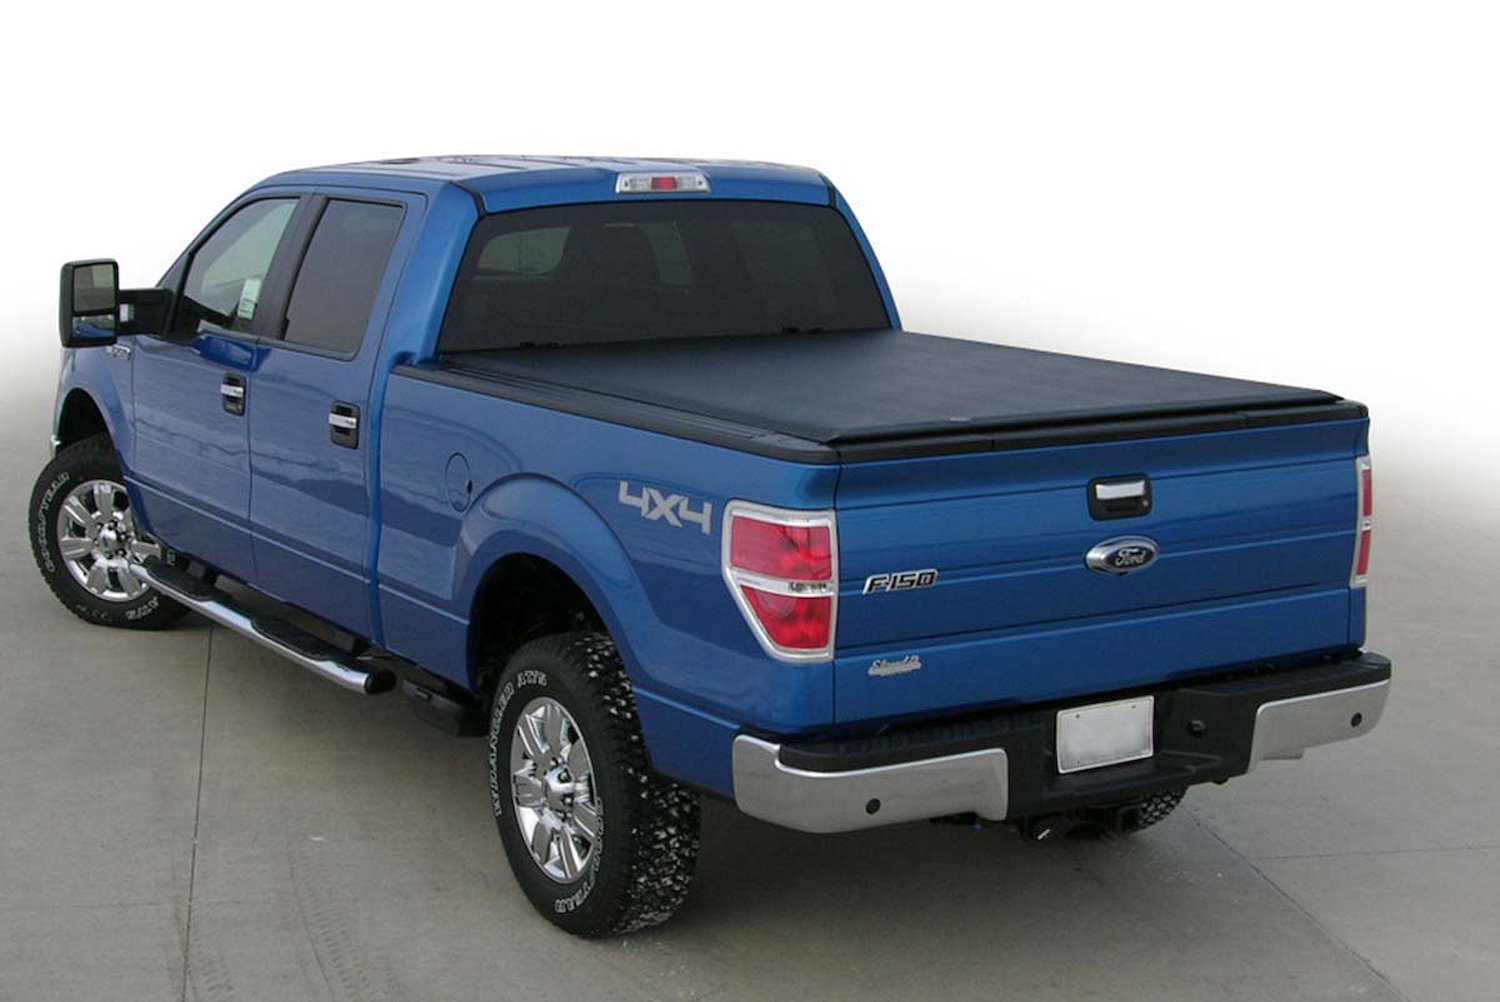 LORADO Roll-Up Tonneau Cover, 2004-2014 Ford F-150, 2007-2008 Lincoln Mark LT, with 6 ft. 6 in. Bed